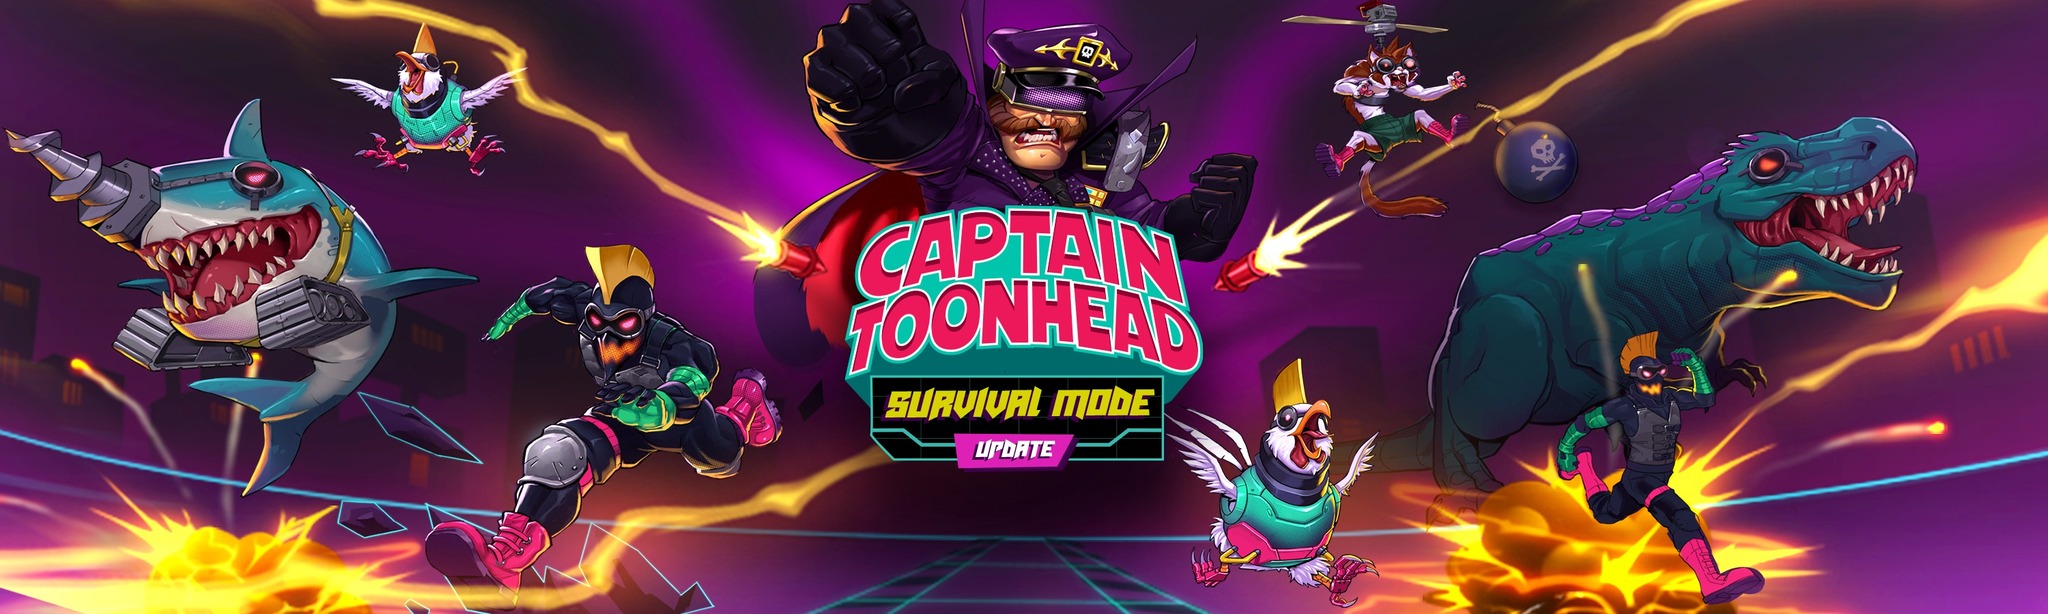 VR Tower Defense Game 'Captain Toonhead' Coming To Quest - VRScout